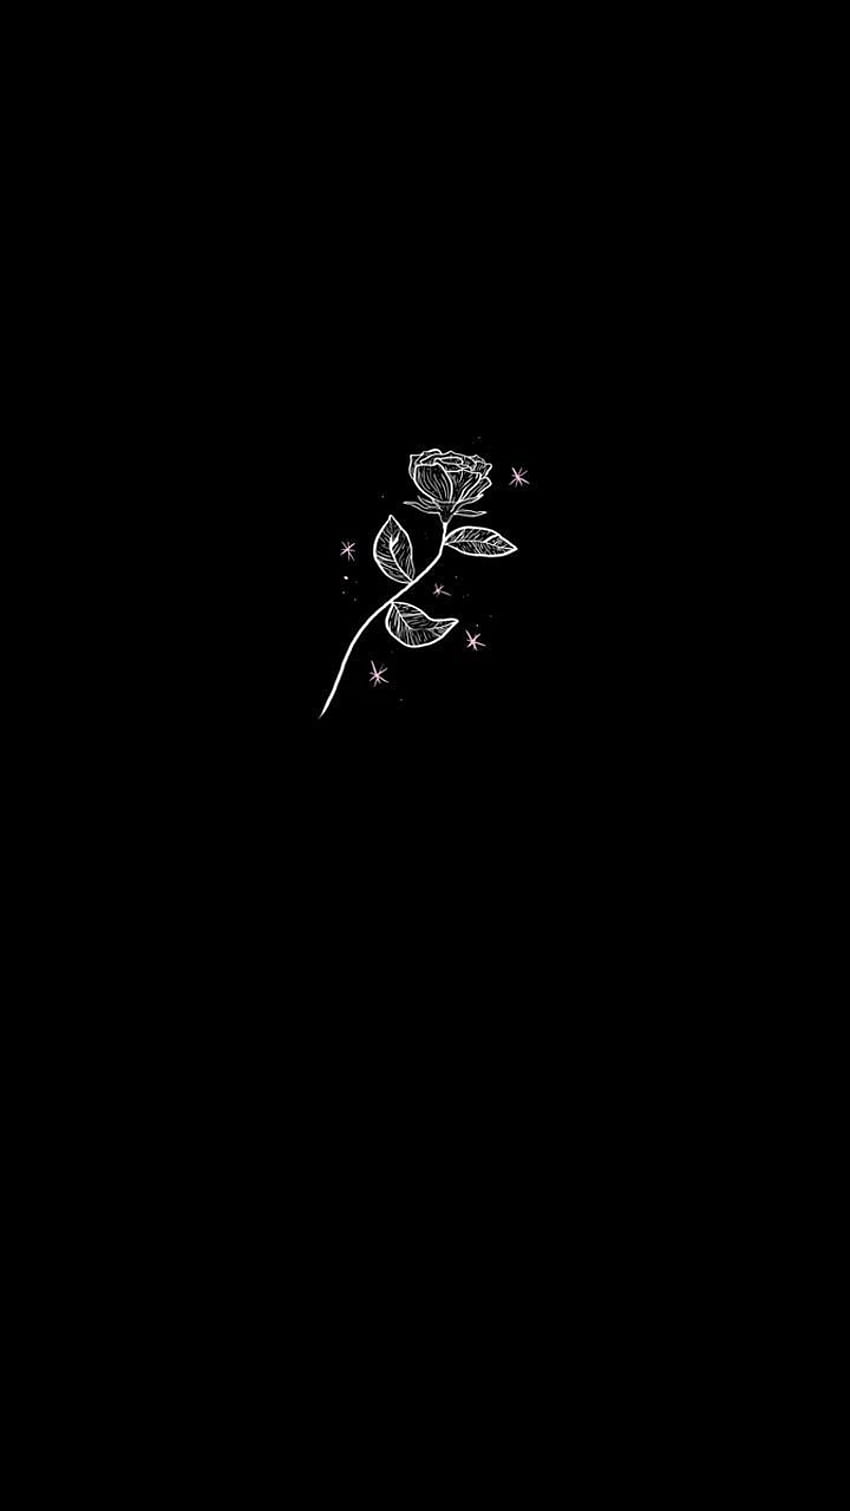 Black aesthetic wallpaper for phone with a white rose - Black